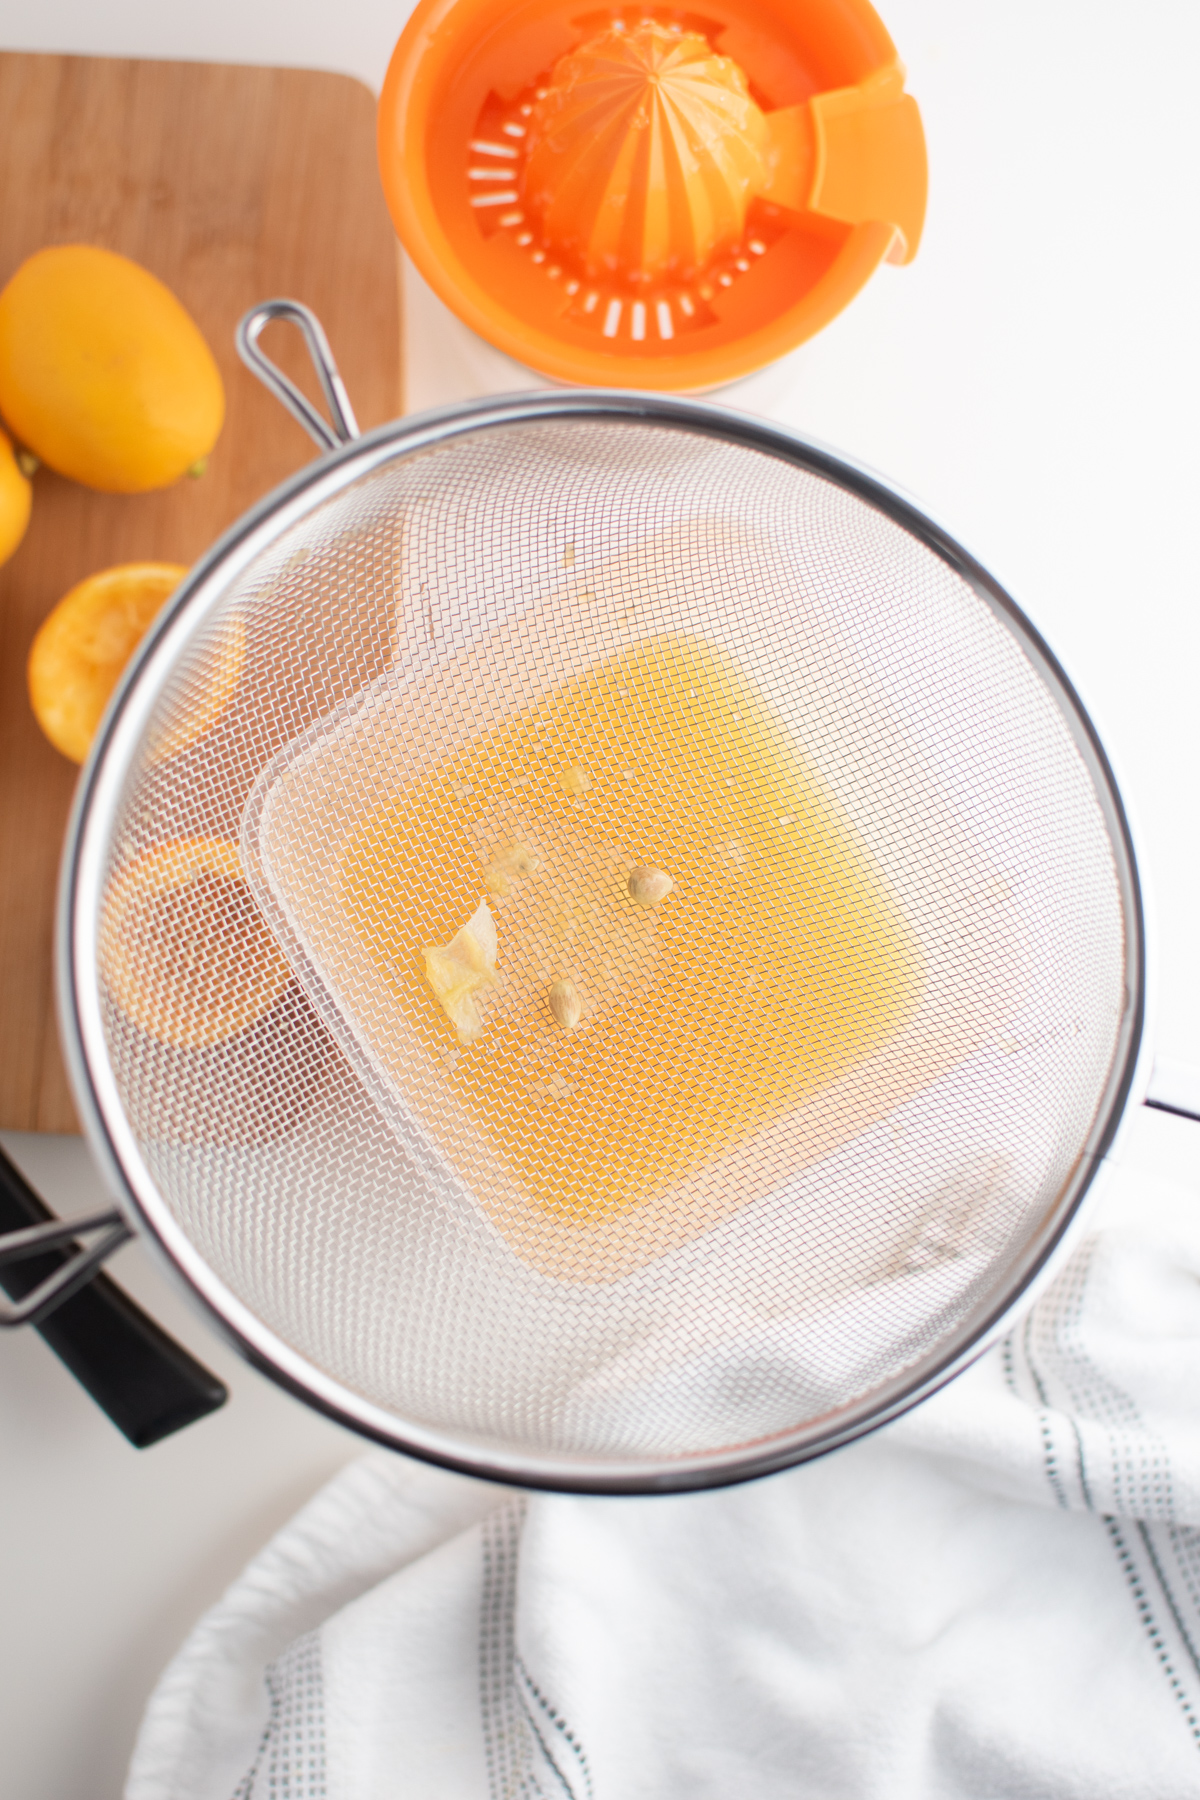 Strained lemon juice under fine mesh sieve next to juicer and wooden cutting board.